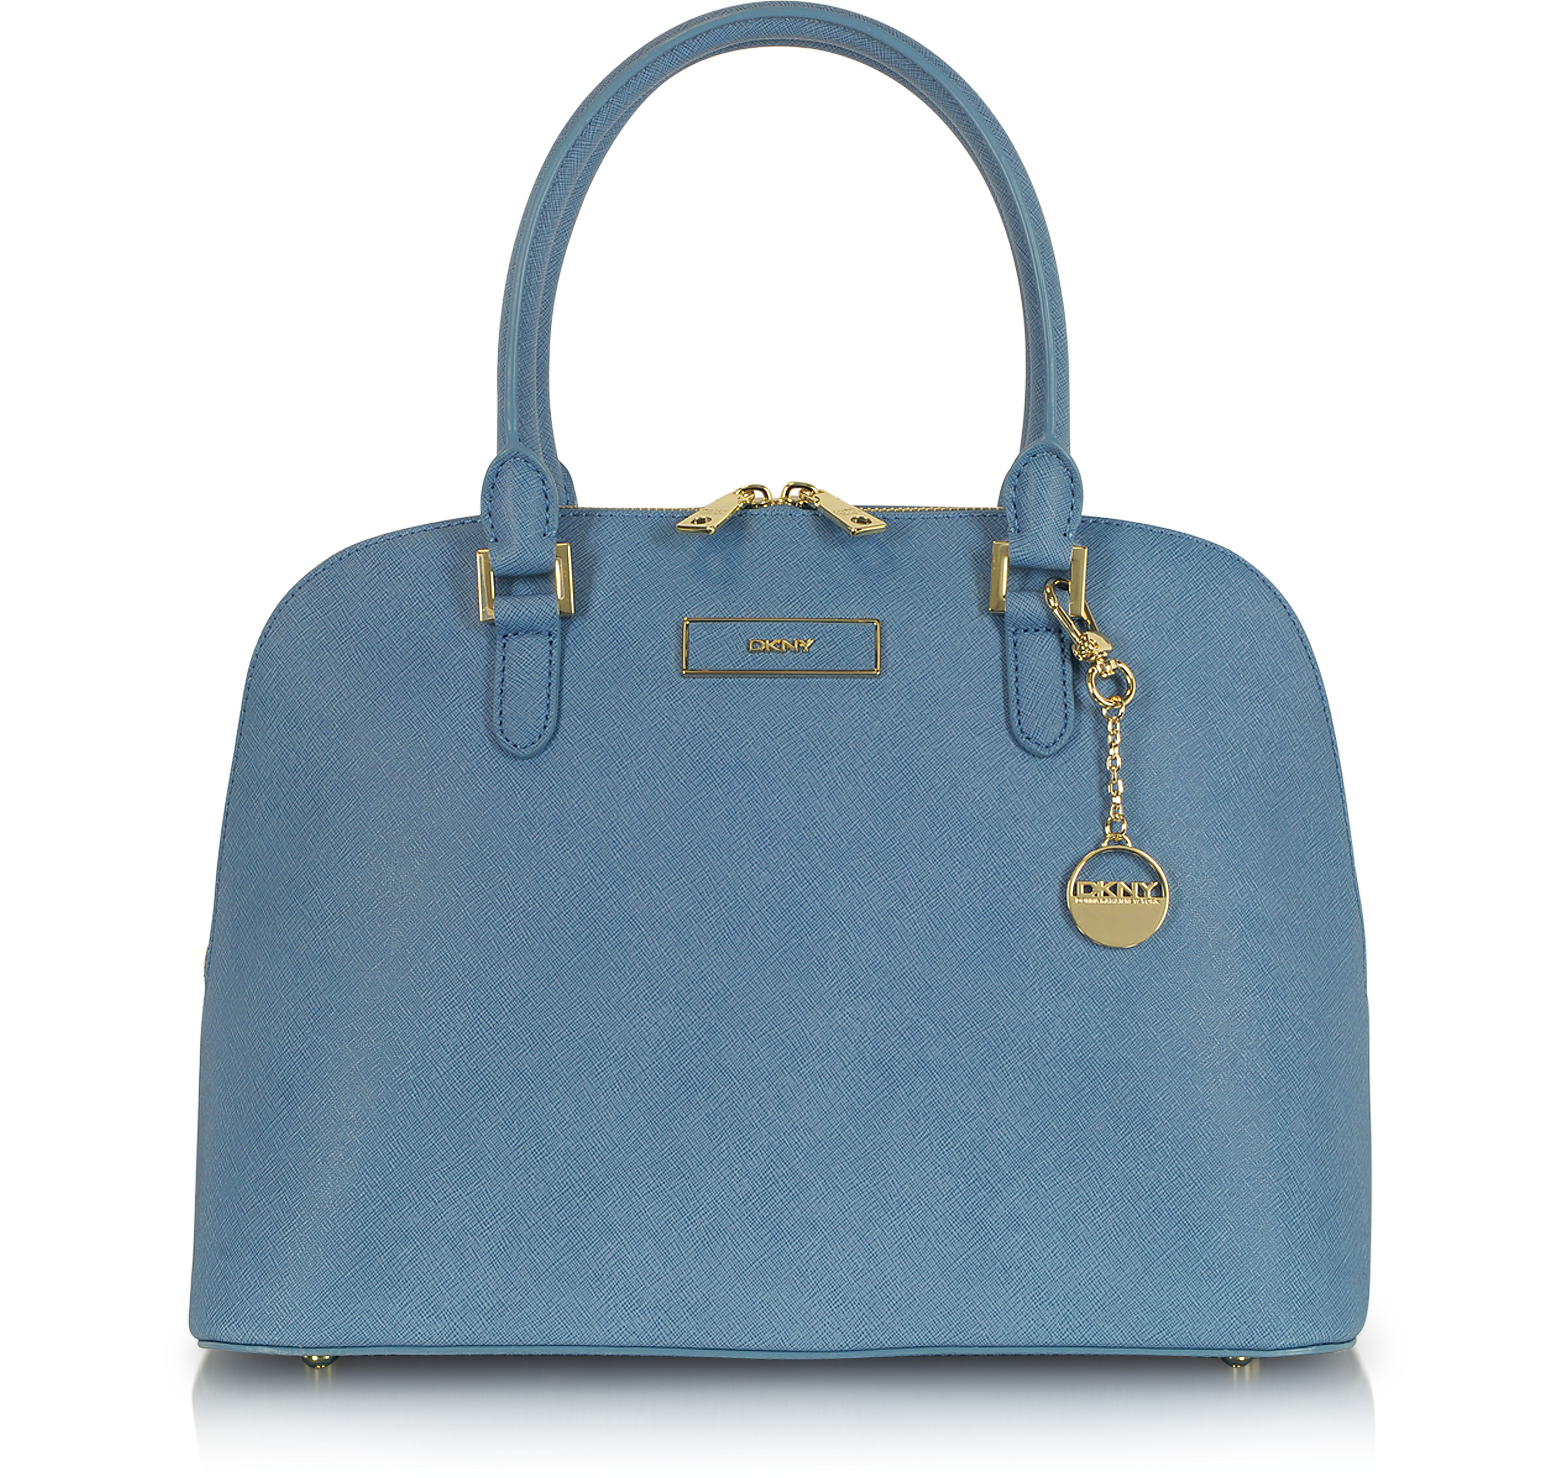 DKNY Blue Large Saffiano Leather Bowler Bag at FORZIERI